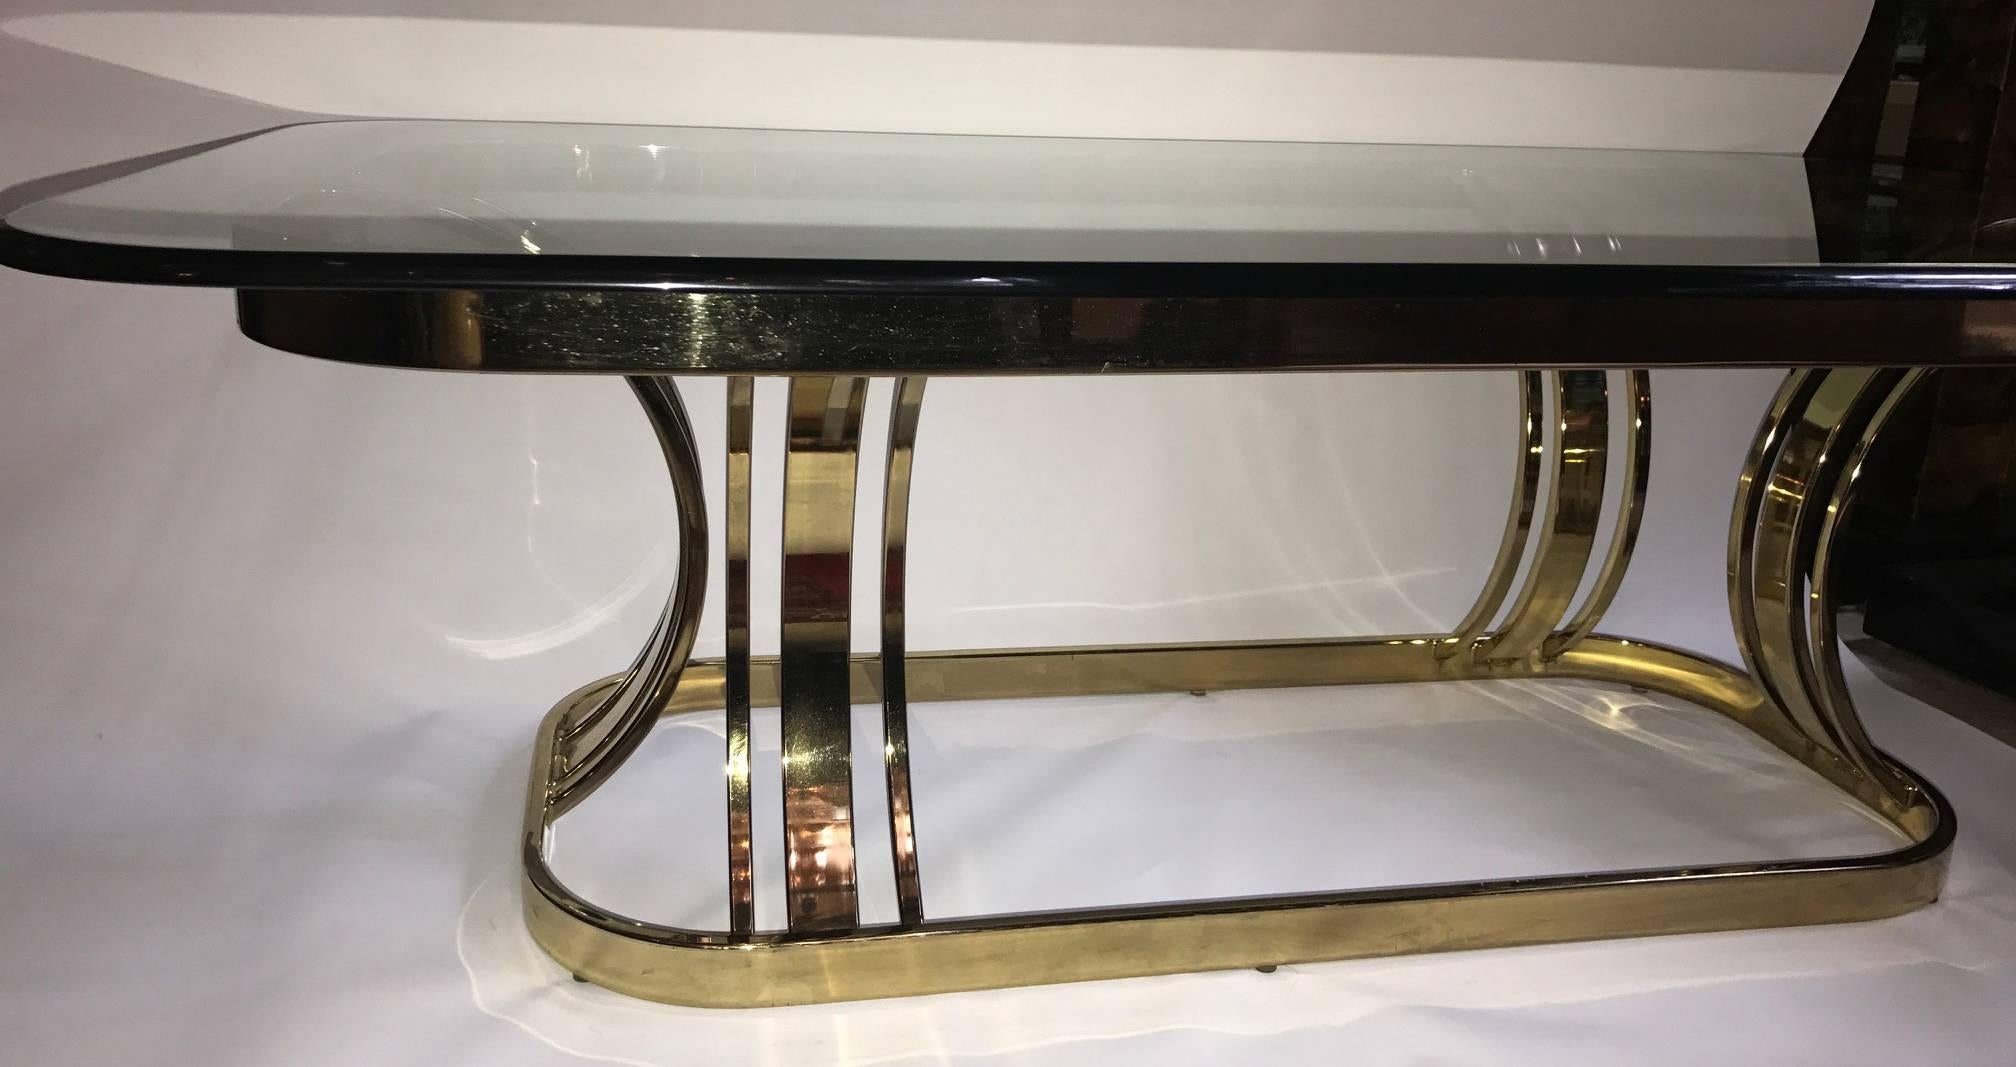 A circa 1970's Italian gilt coffee table with glass top.

Measurements:
Height: 16.5